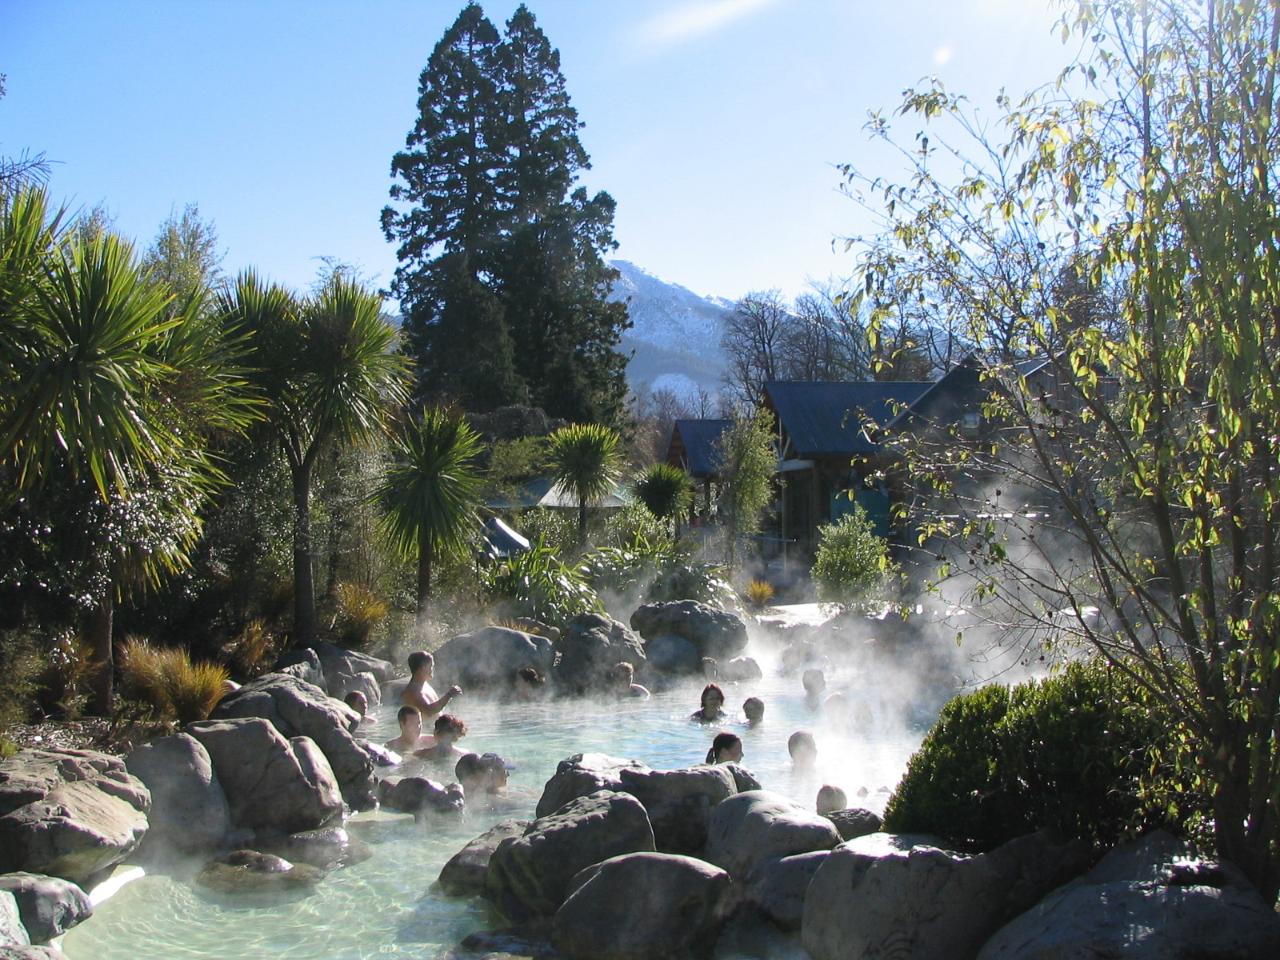 Hanmer Springs Day Tour From Christchurch With Jetboat Ride (Small Group, Carbon Neutral)